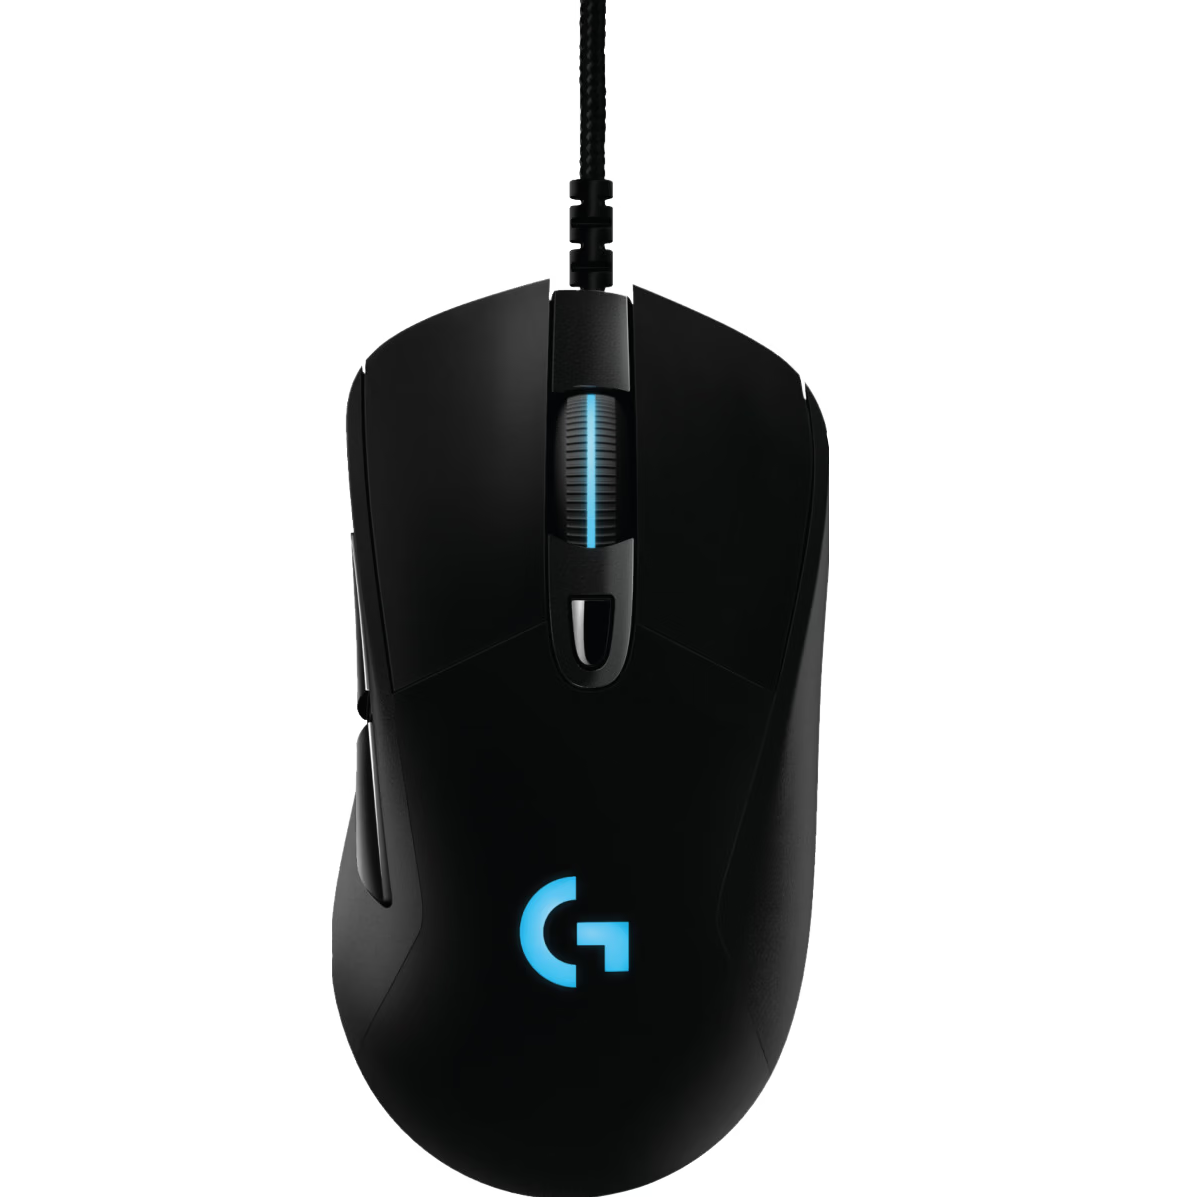 Logitech G403 HERO Wired Gaming Mouse - Black